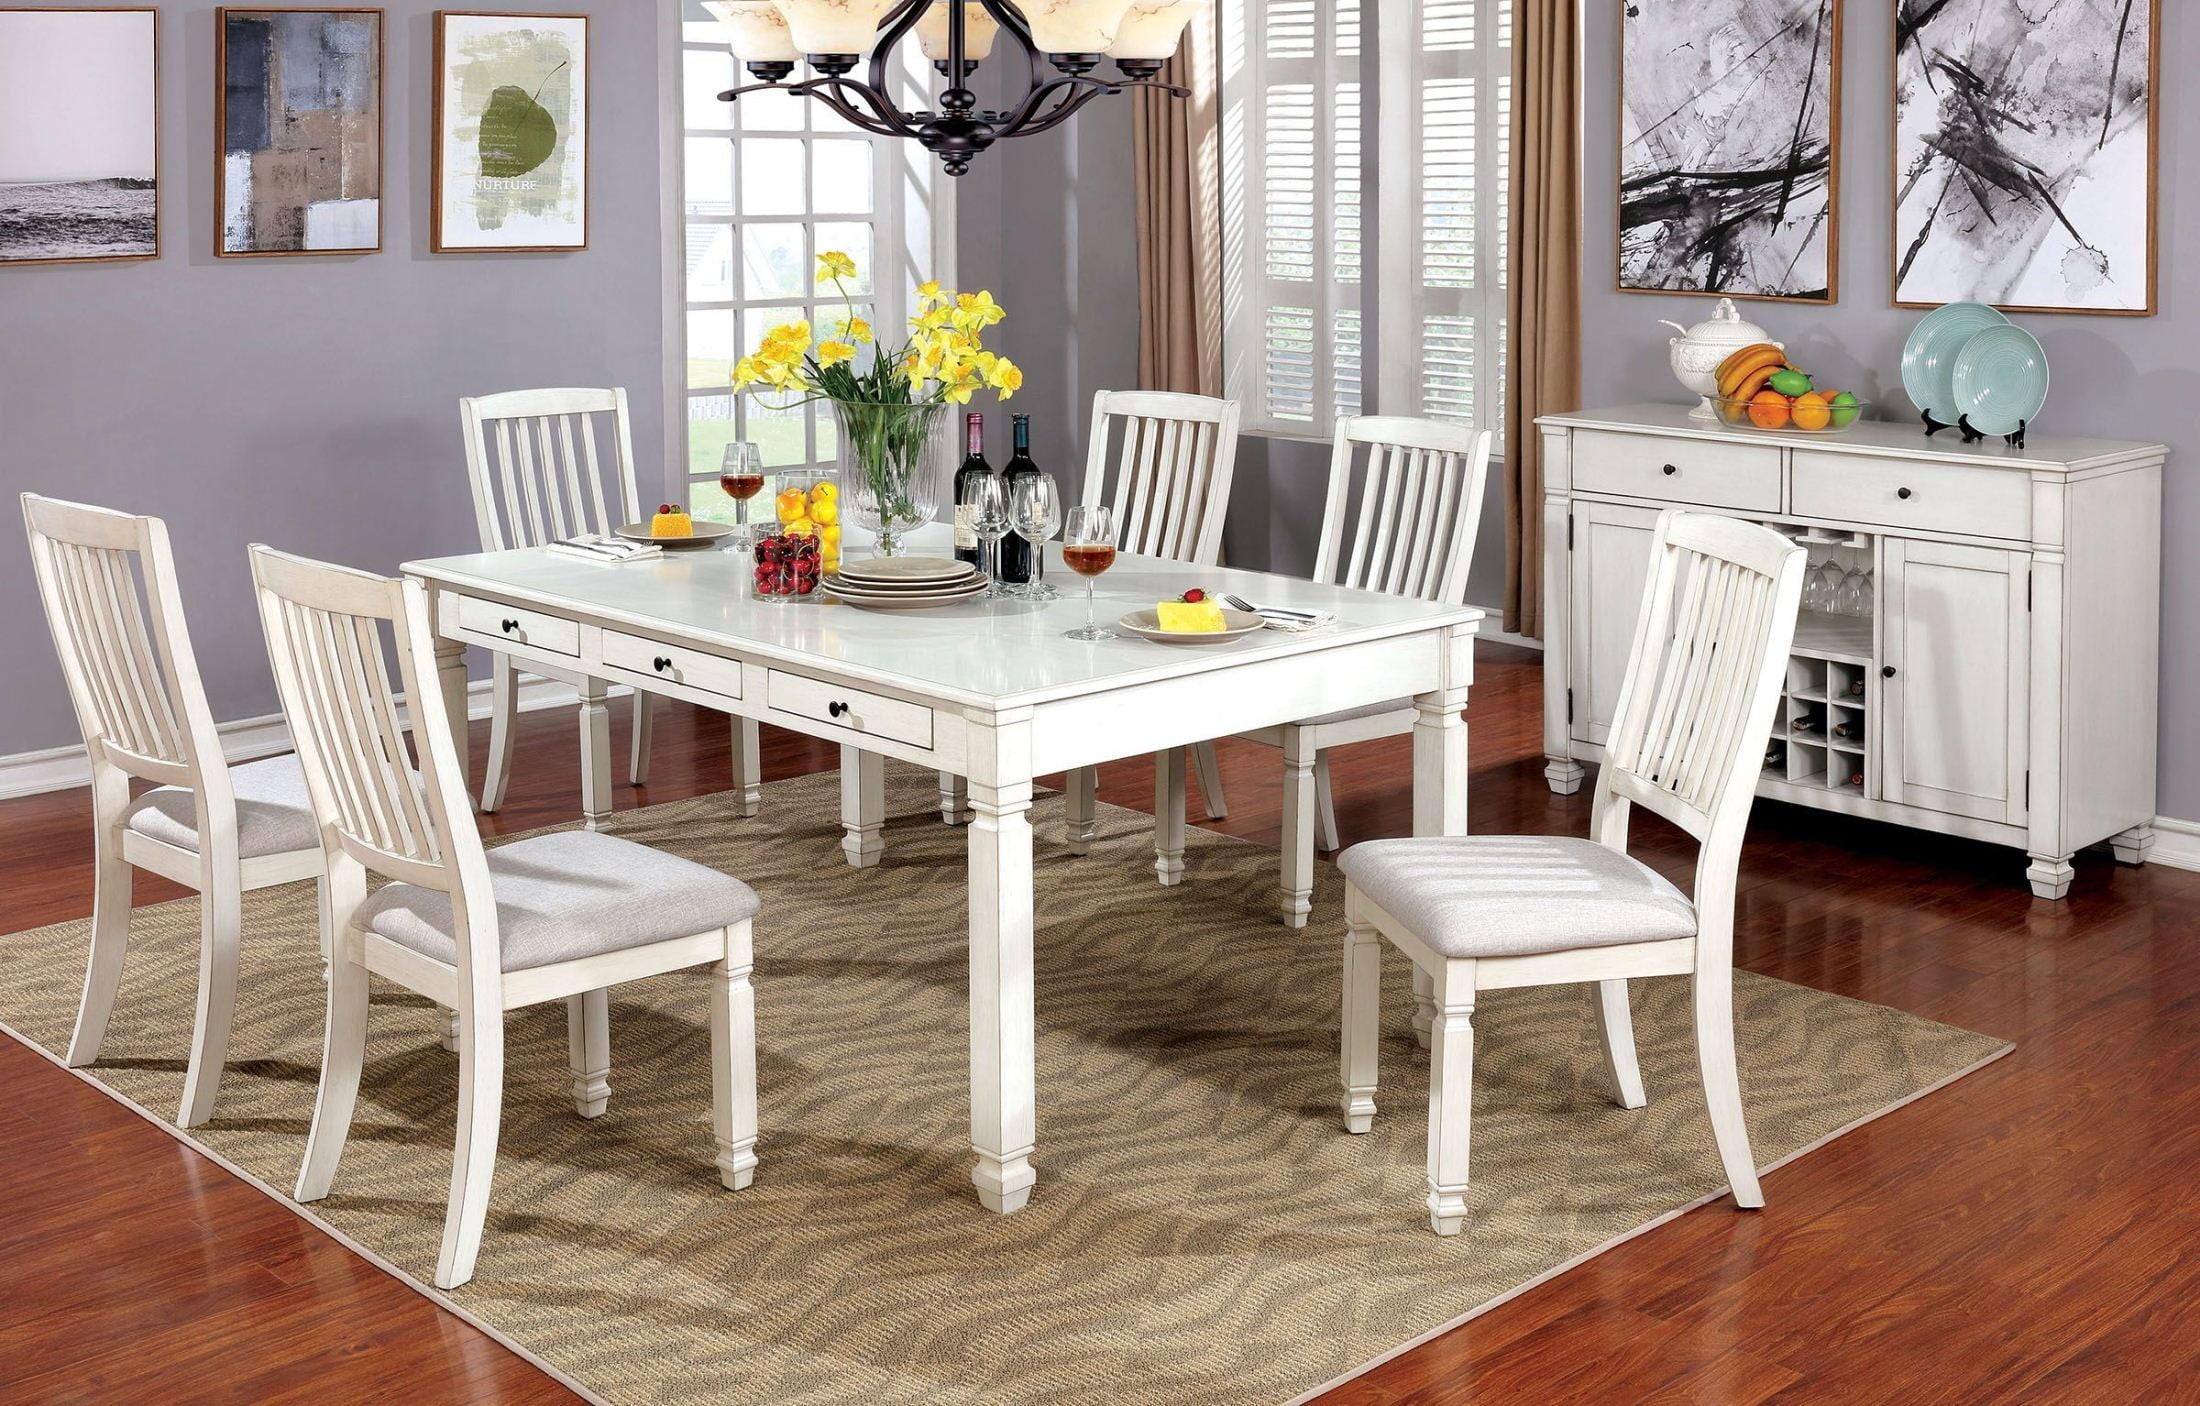 White Dining Room Set With Rug